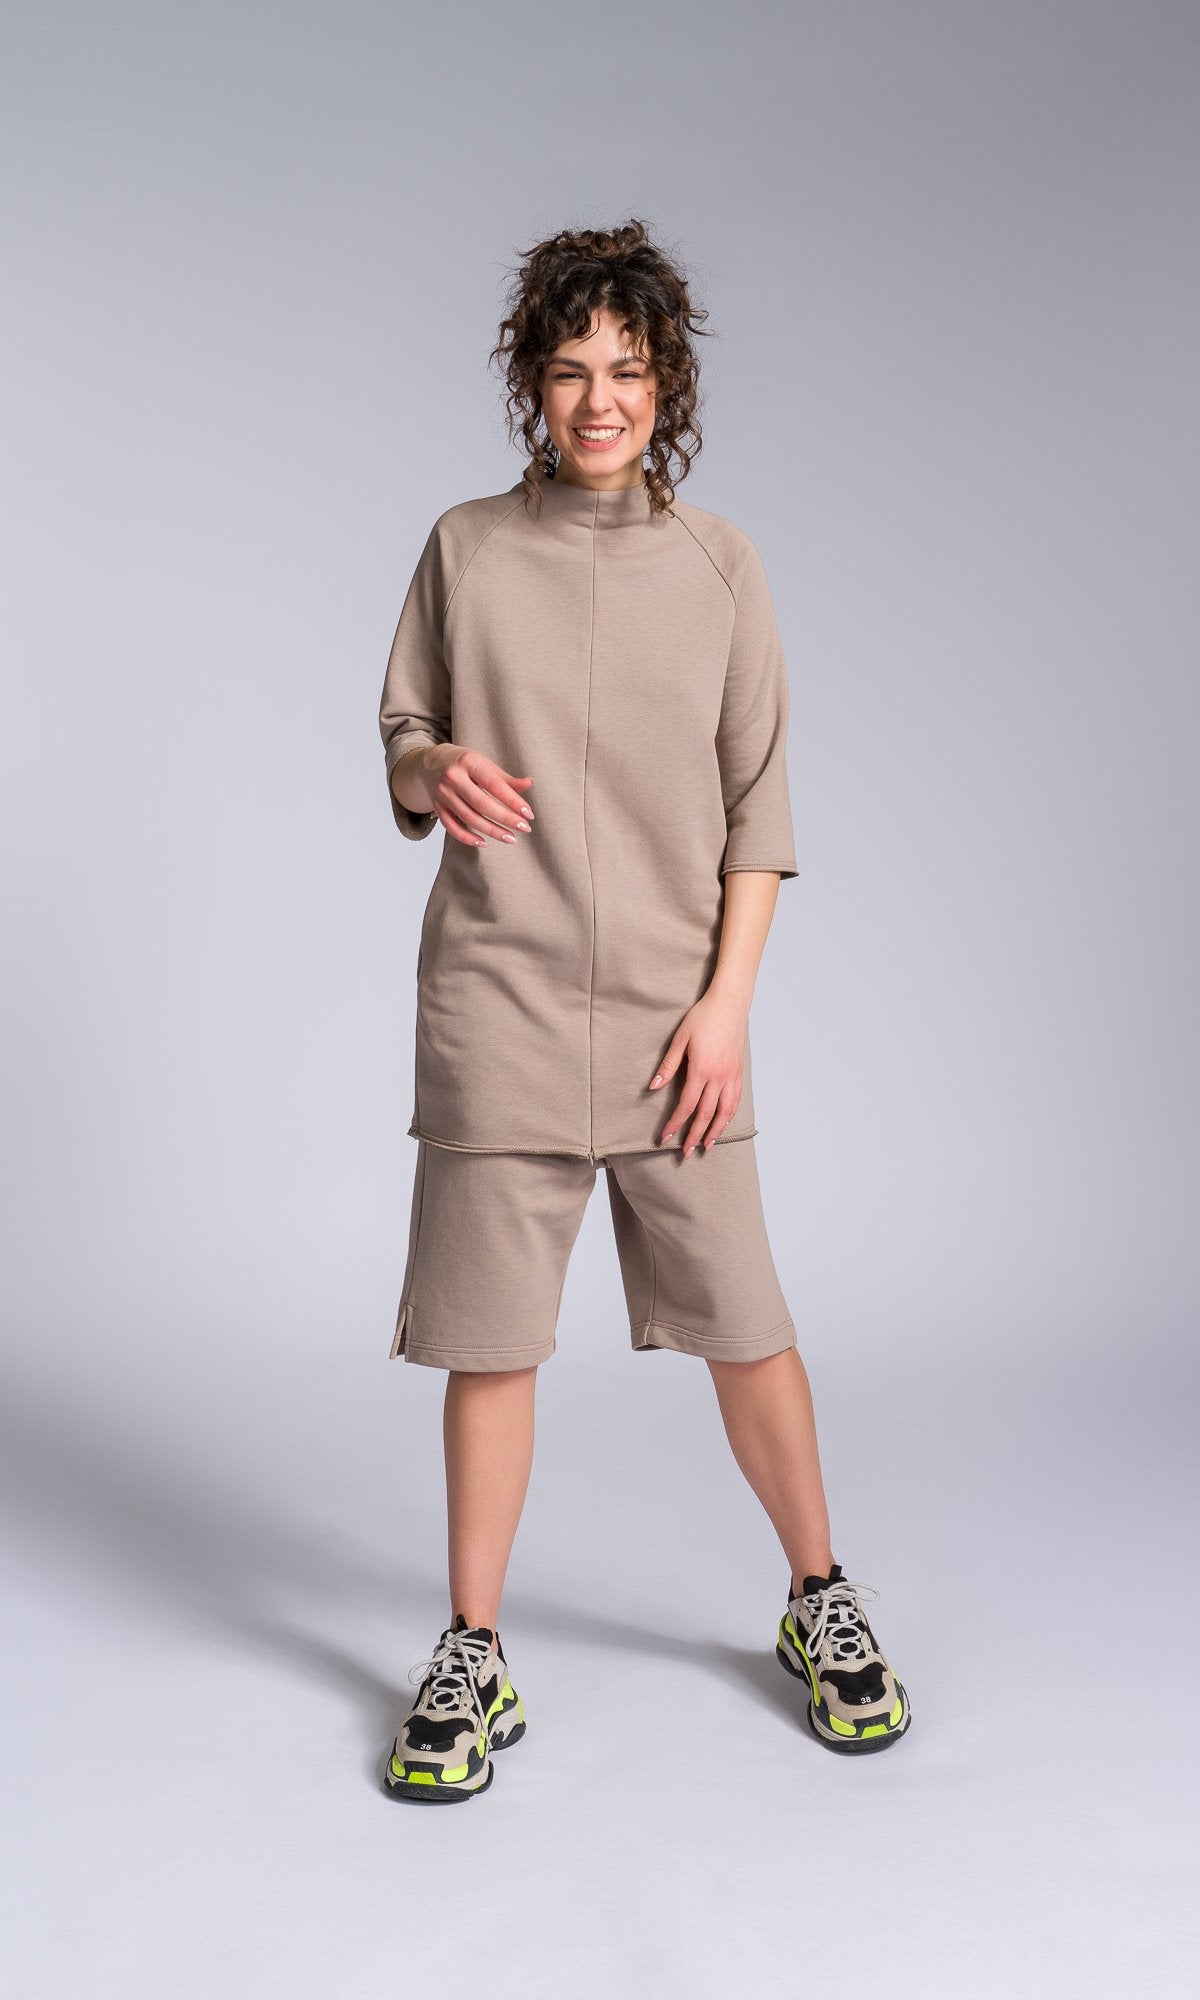 Two-piece Set of Tunic Sweatshirt with Zipper Slits and Cotton Shorts